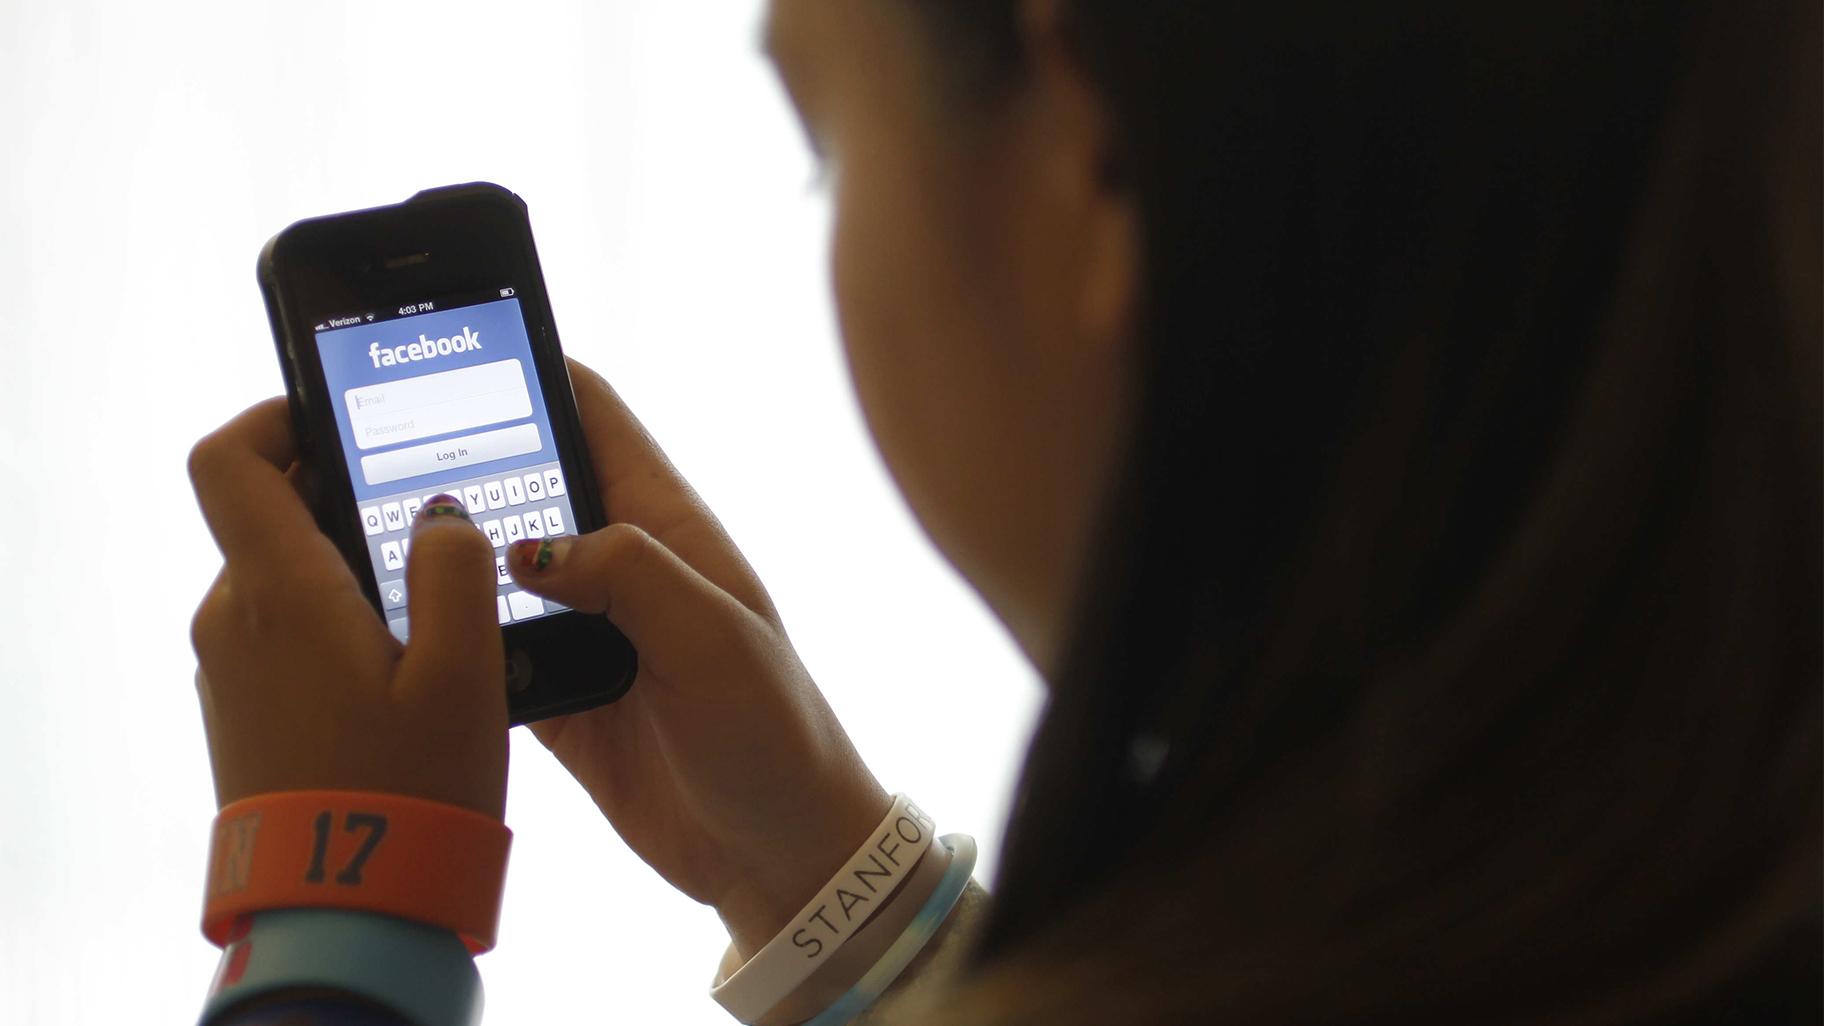 In this June 4, 2012, file photo, an unidentified 11-year-old girl logs into Facebook on her iPhone at her home in Palo Alto, Calif. (AP Photo / Paul Sakuma, File)